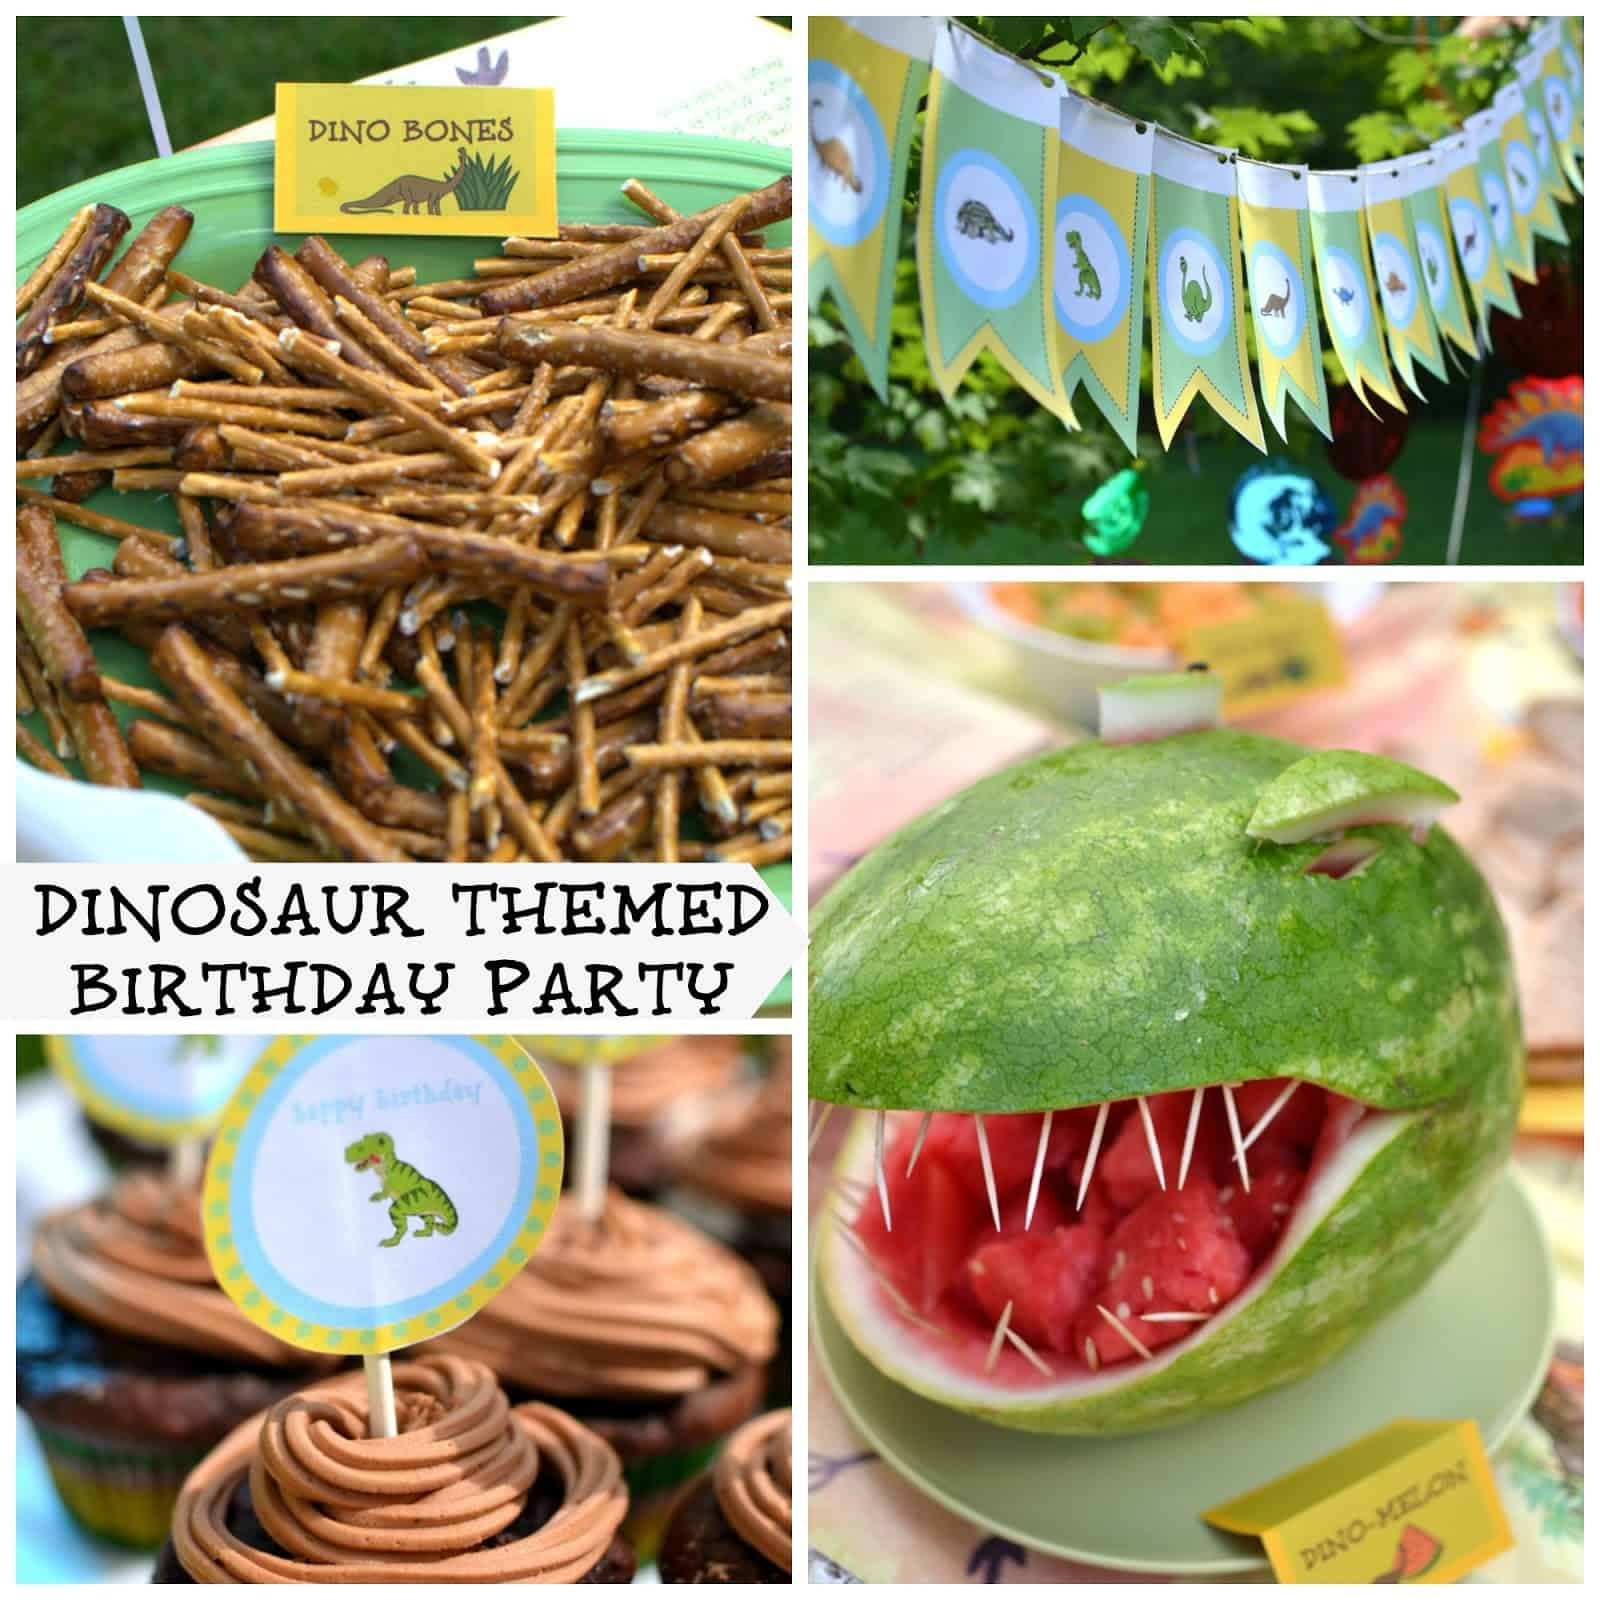 Dinosaur Food Ideas For Birthday Party
 Party with dinosaurs Dinosaur themed birthday party